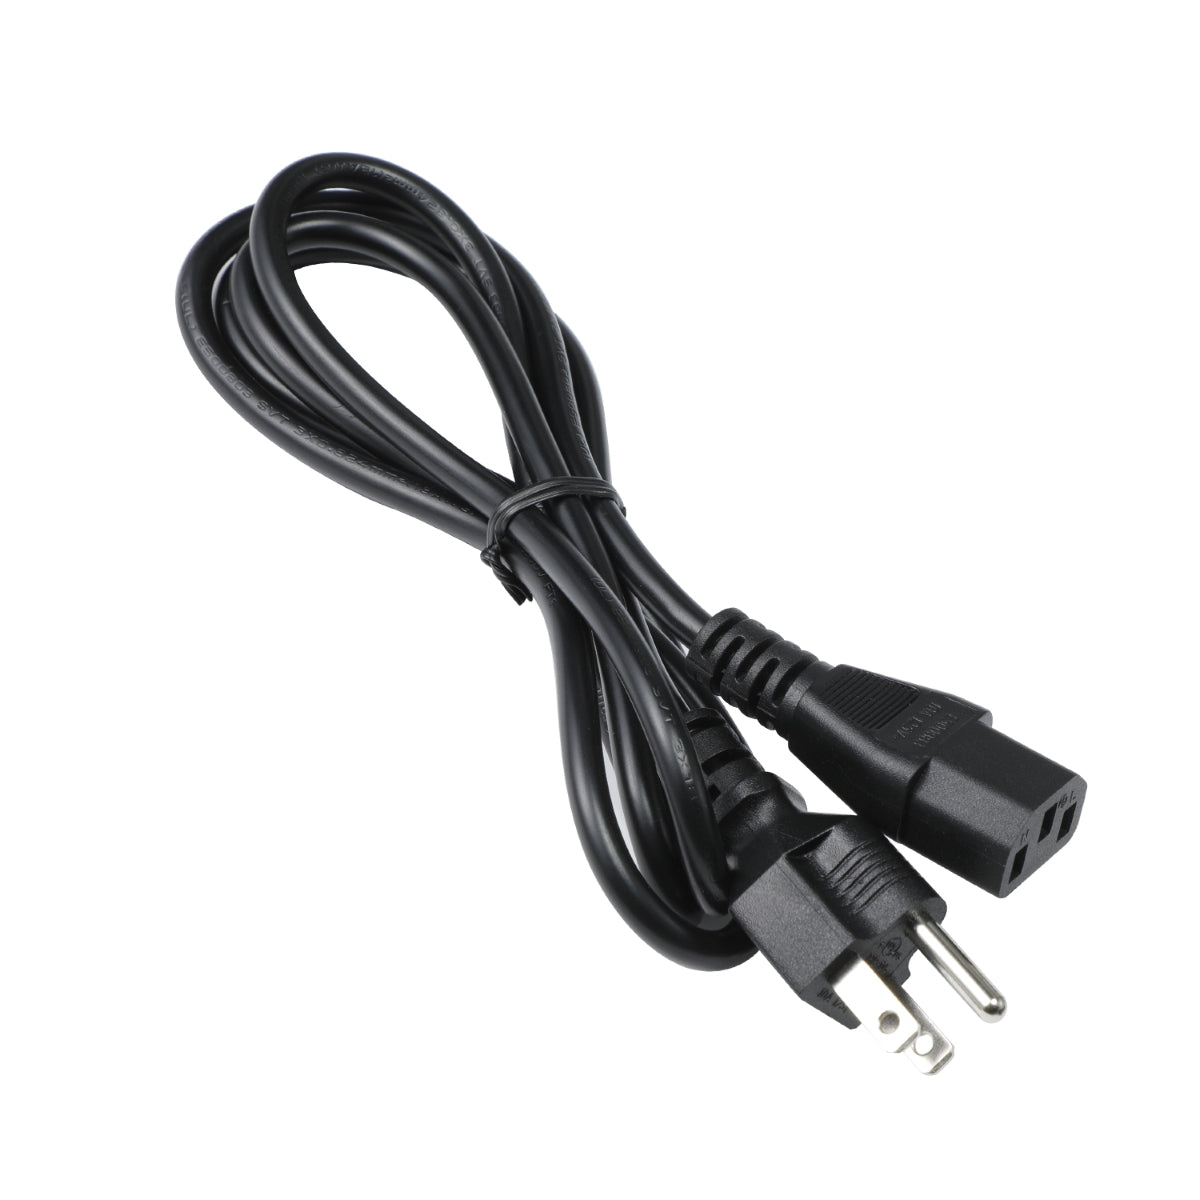 Power Cord for ViewSonic VG2248 Monitor